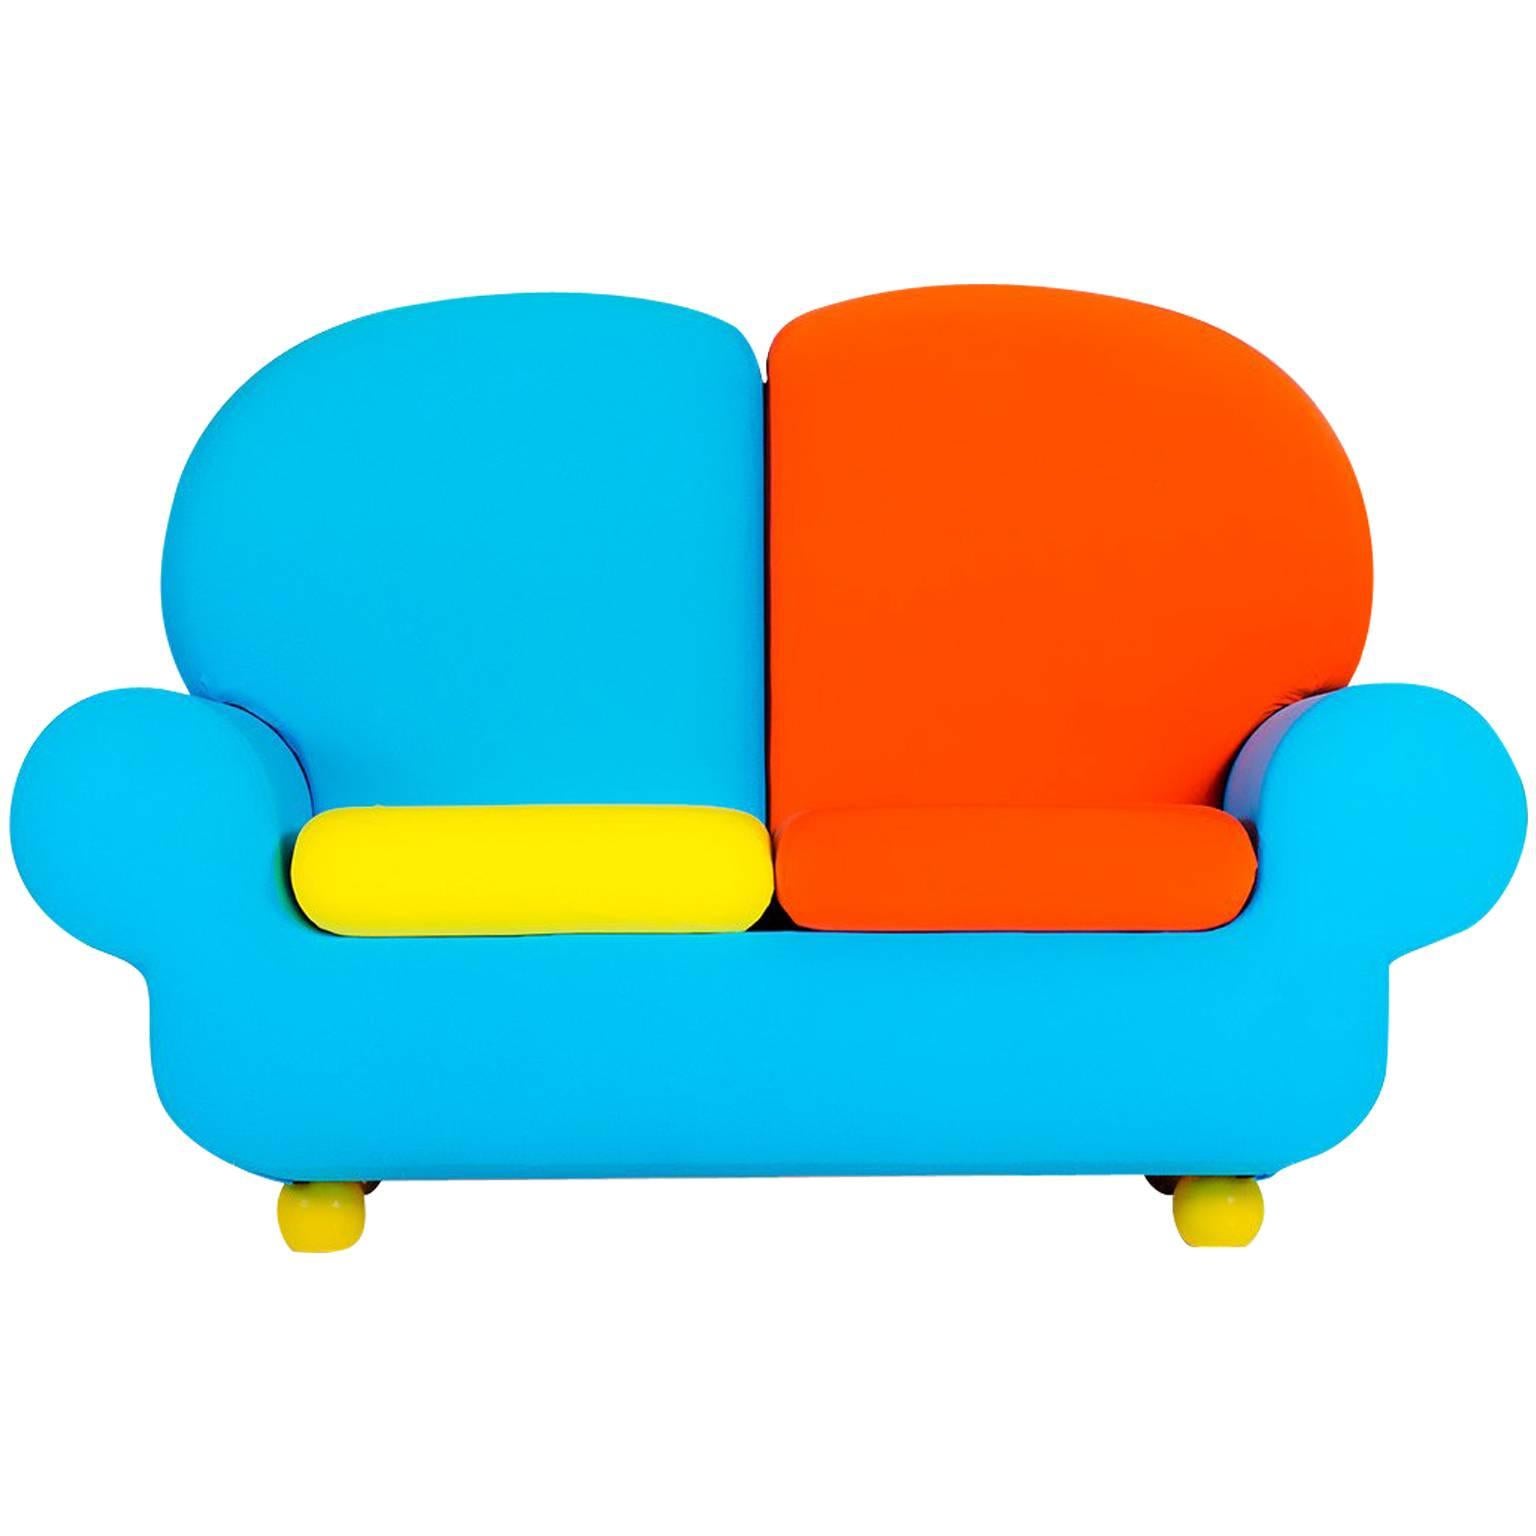 Sofa Two Seats "Papi Colors" the Most Customizable Sofa For Sale